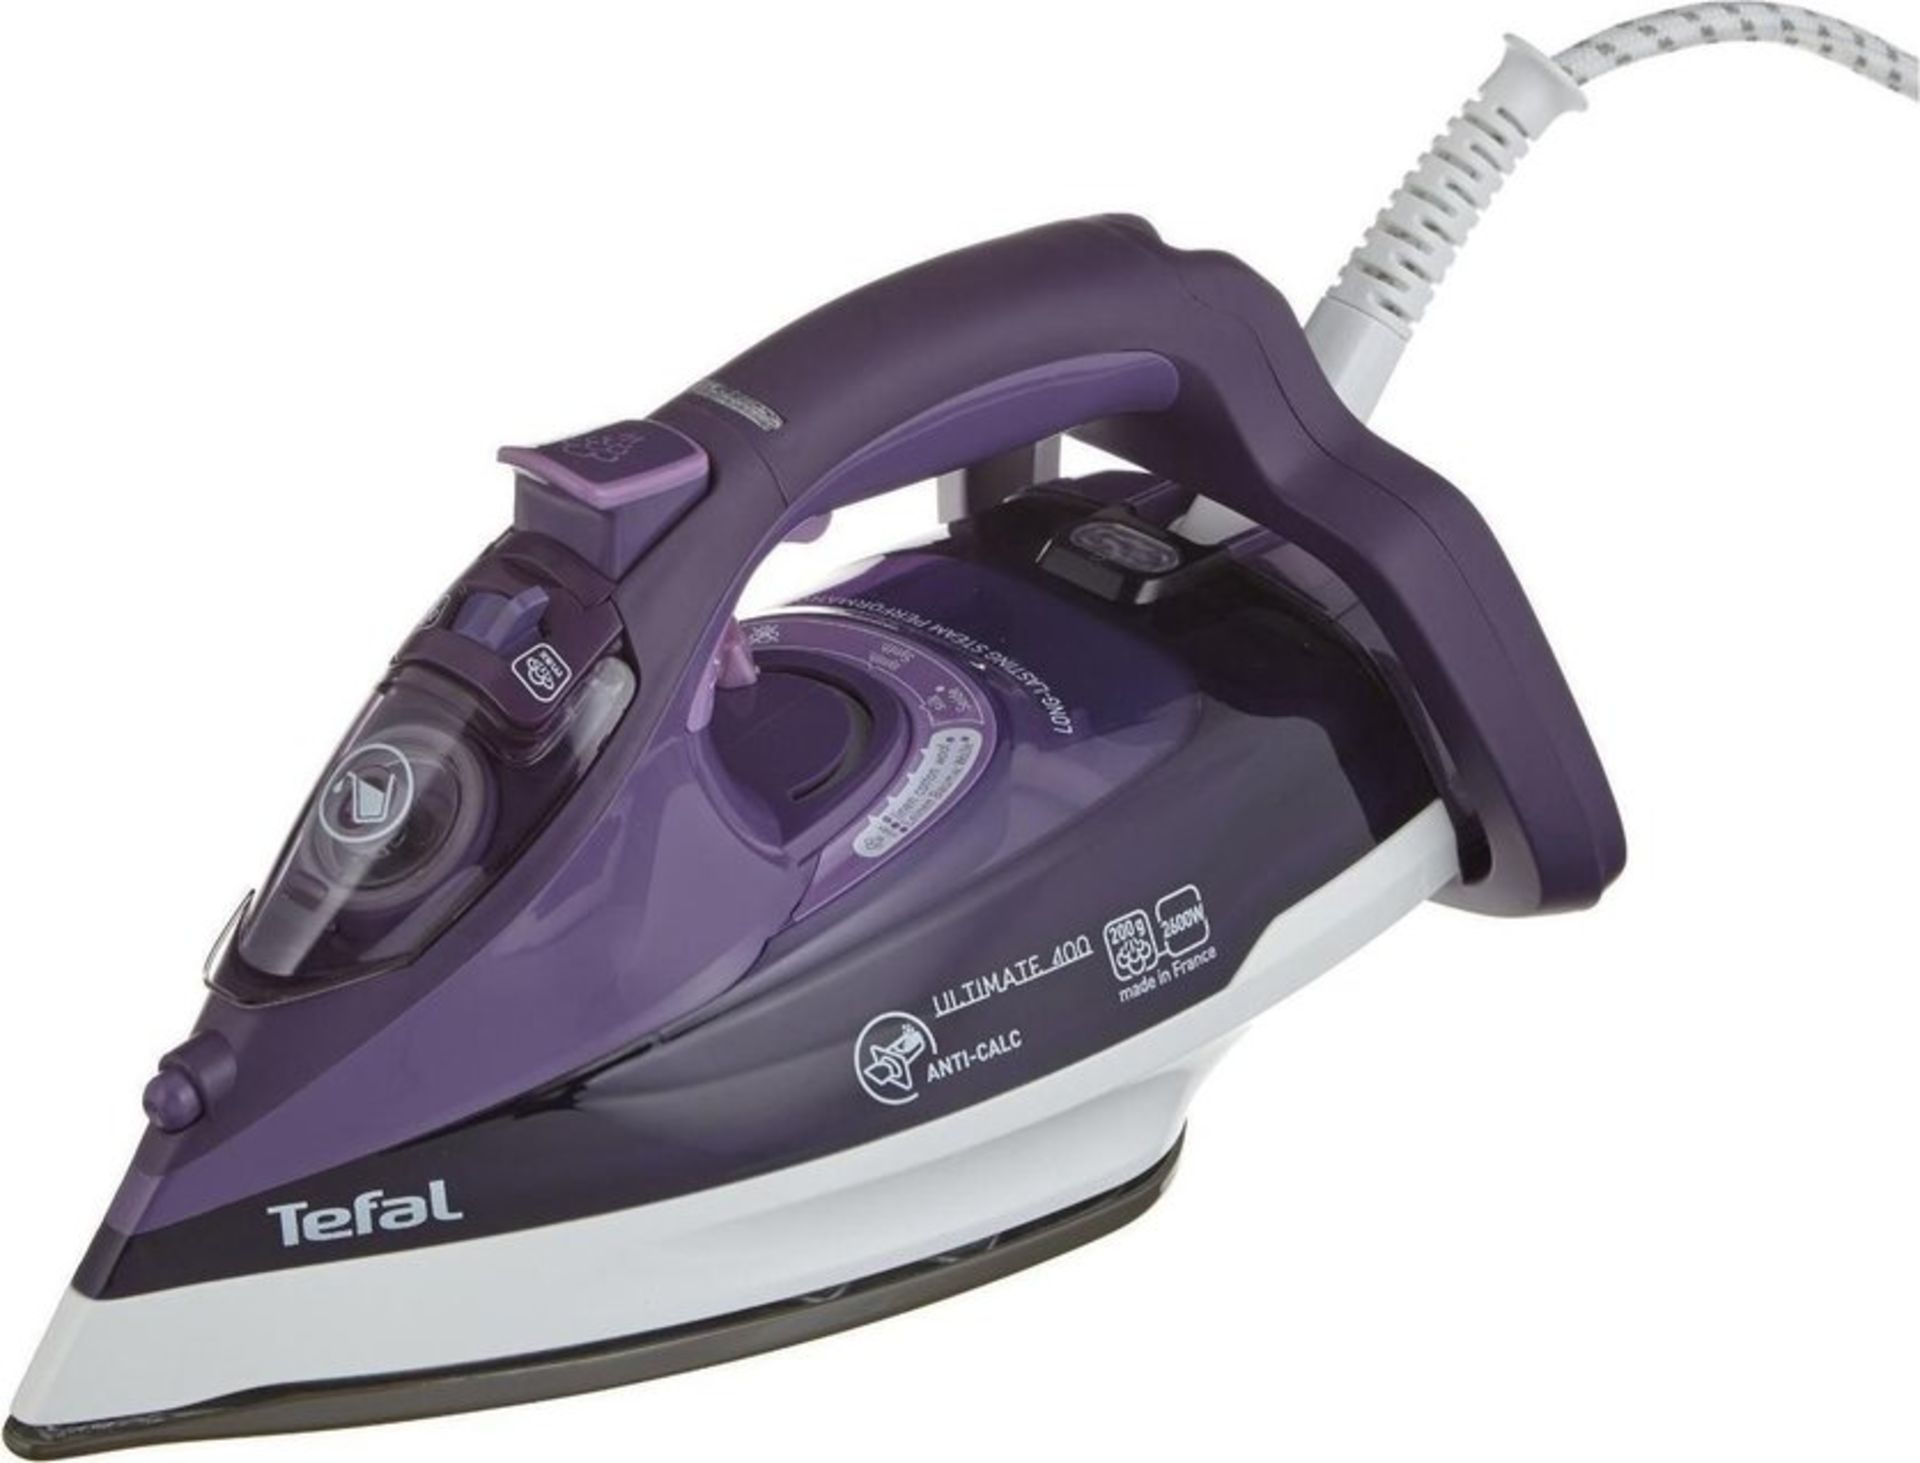 + VAT Brand New Tefal Ultimate Anti Calc 400 2600W Turbo Steam Iron - Glide Protect - Security On/